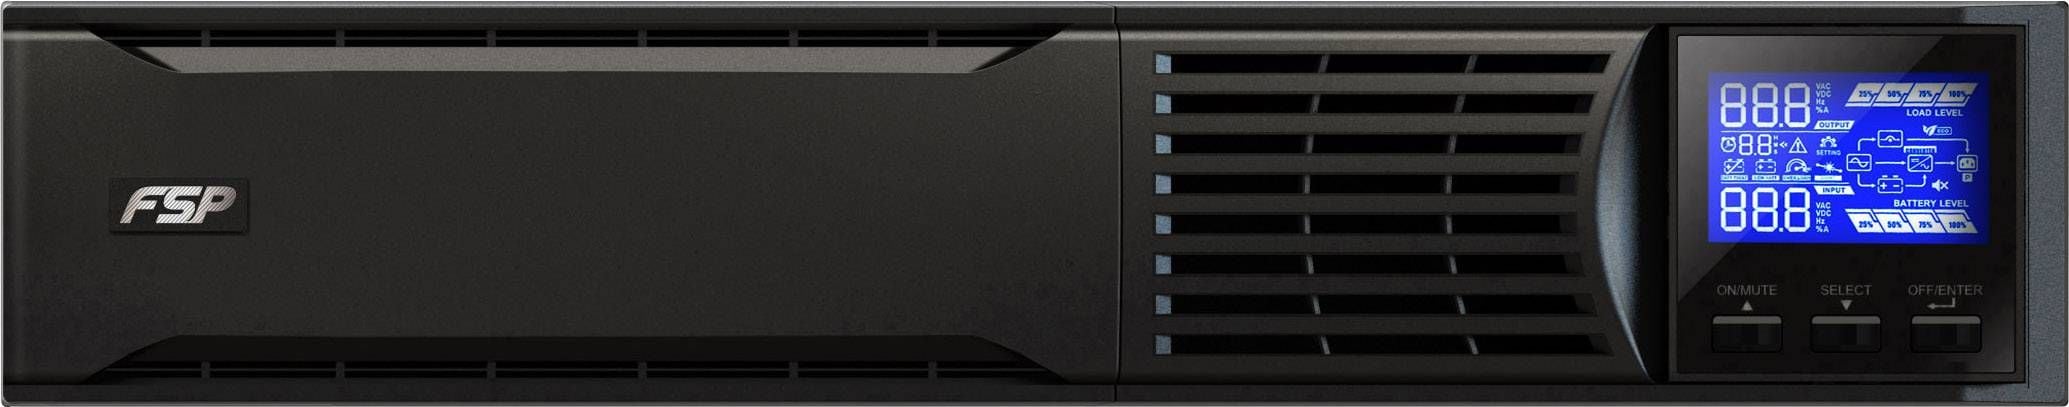 UPS FSP/Fortron Champ 2K (PPF18A1401)